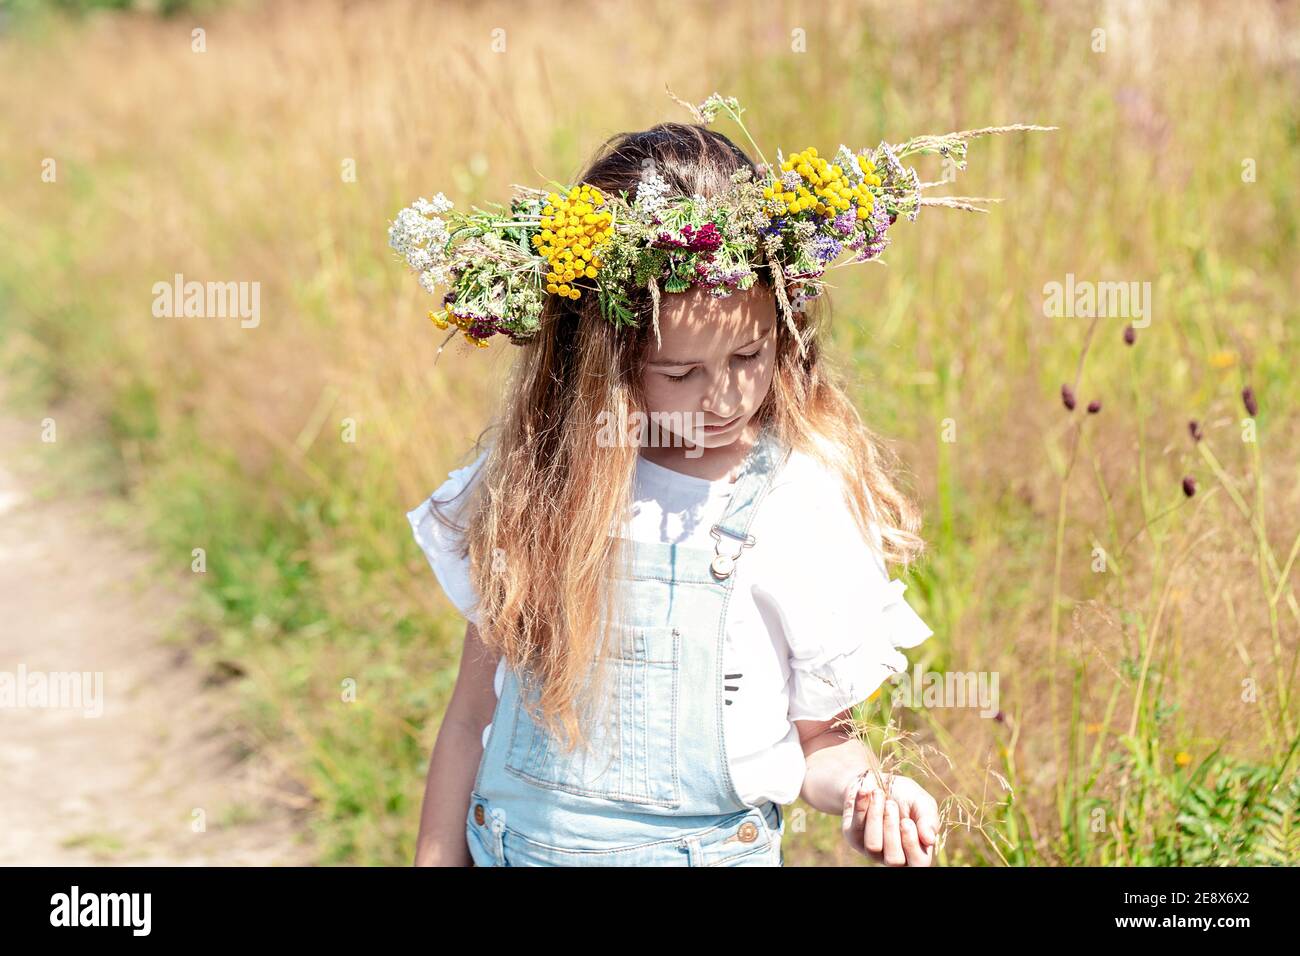 Summer portrait of a beautiful girl. Cute girl in a wreath of wildflowers on her head Stock Photo